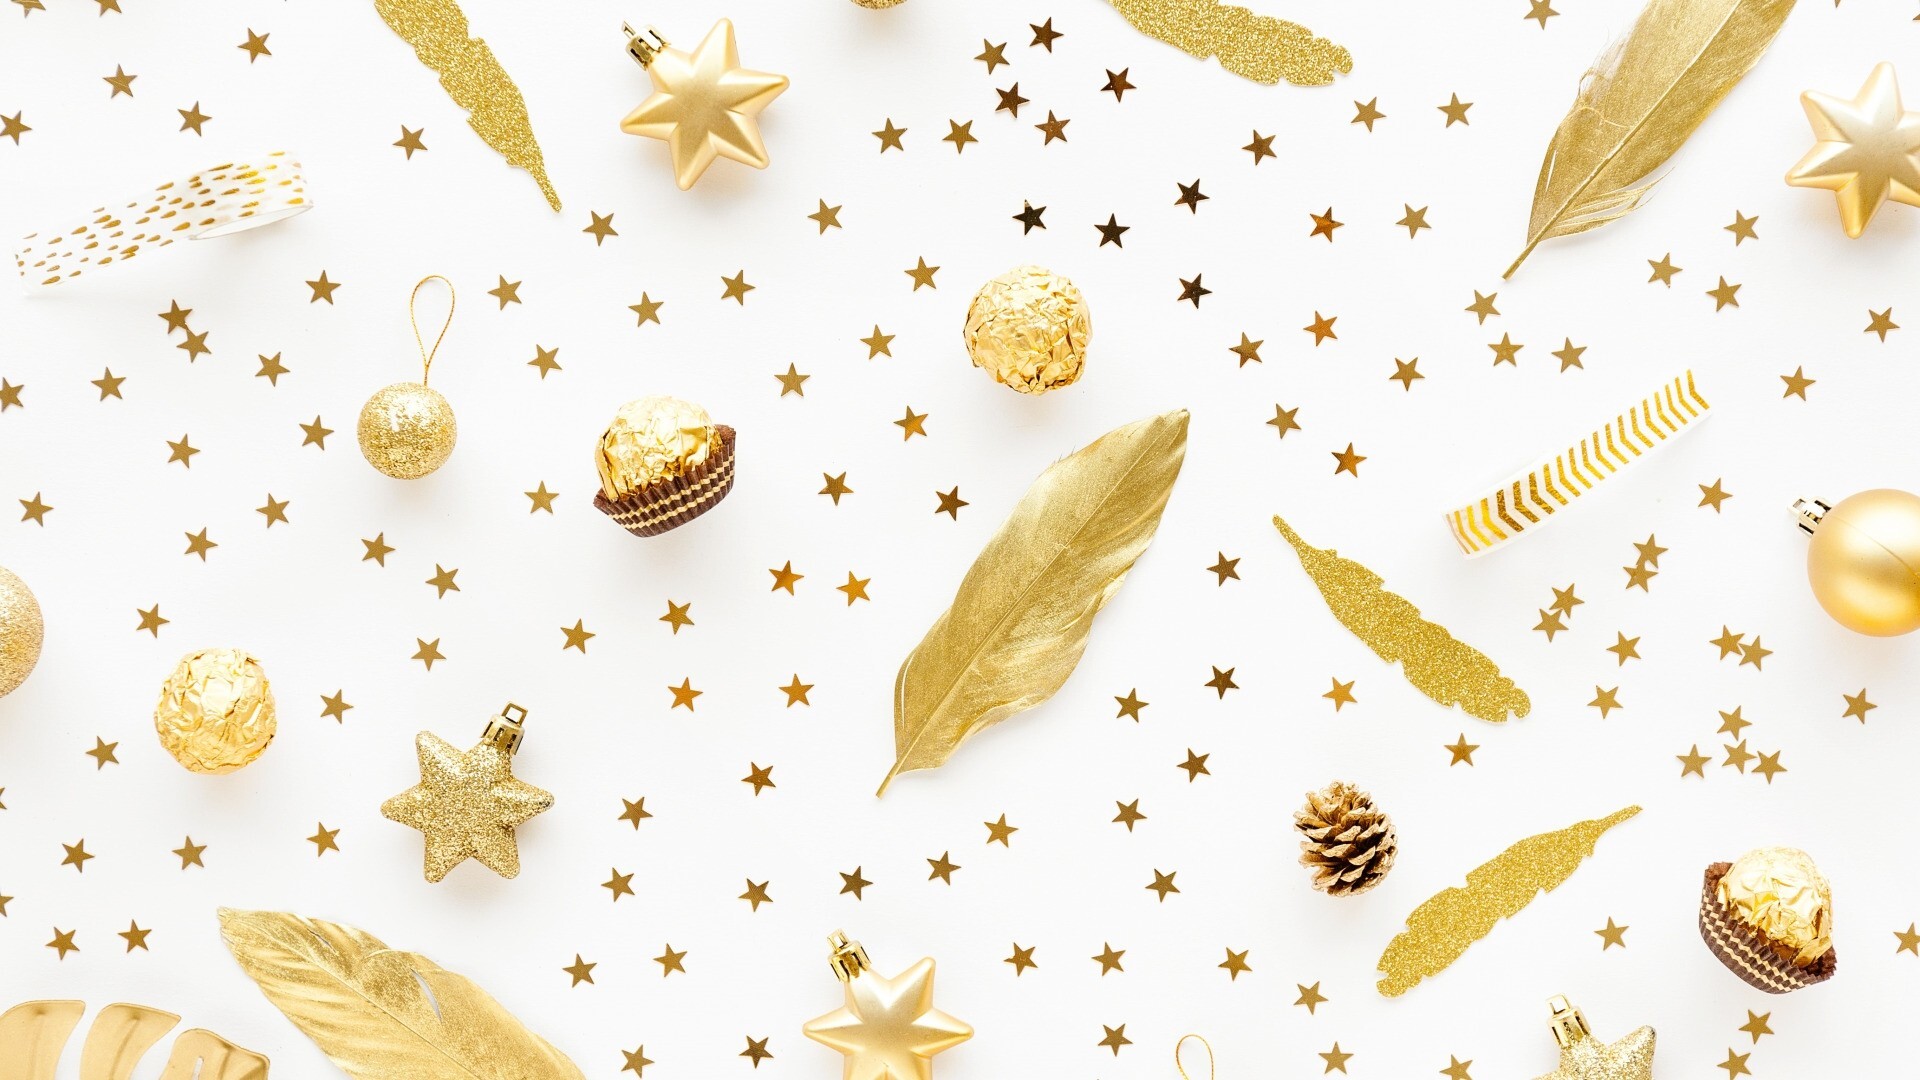 Gold Star: DIY colorful Christmas ornaments, Pine cones, Golden leaves and baubles. 1920x1080 Full HD Wallpaper.